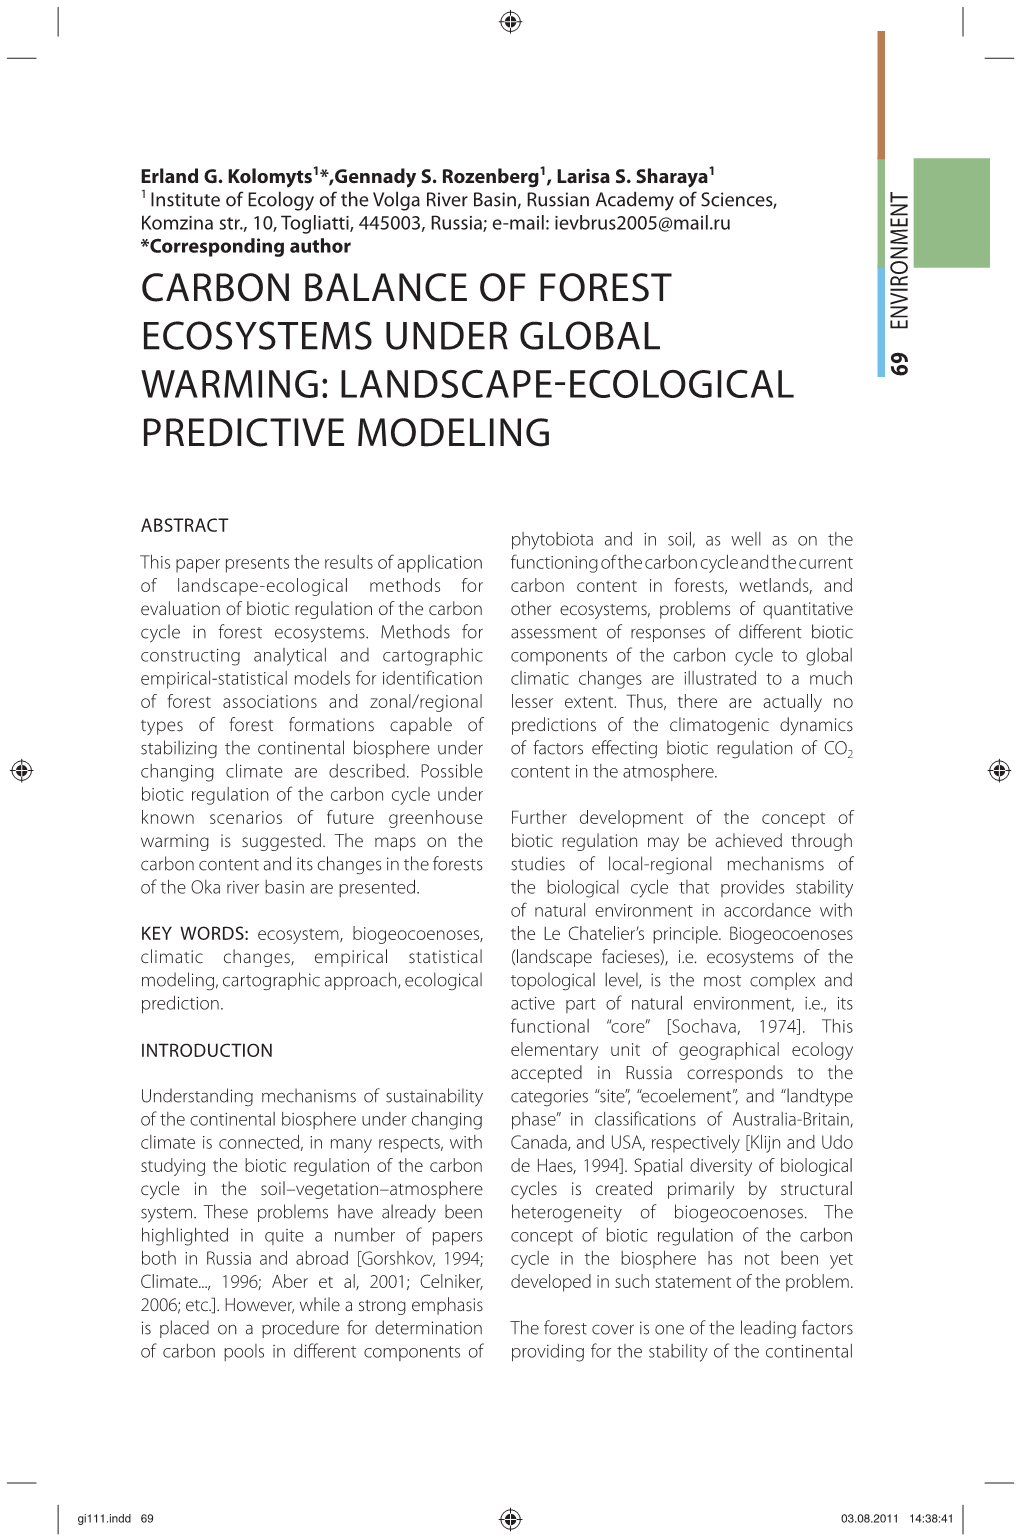 Carbon Balance of Forest Ecosystems Under Global